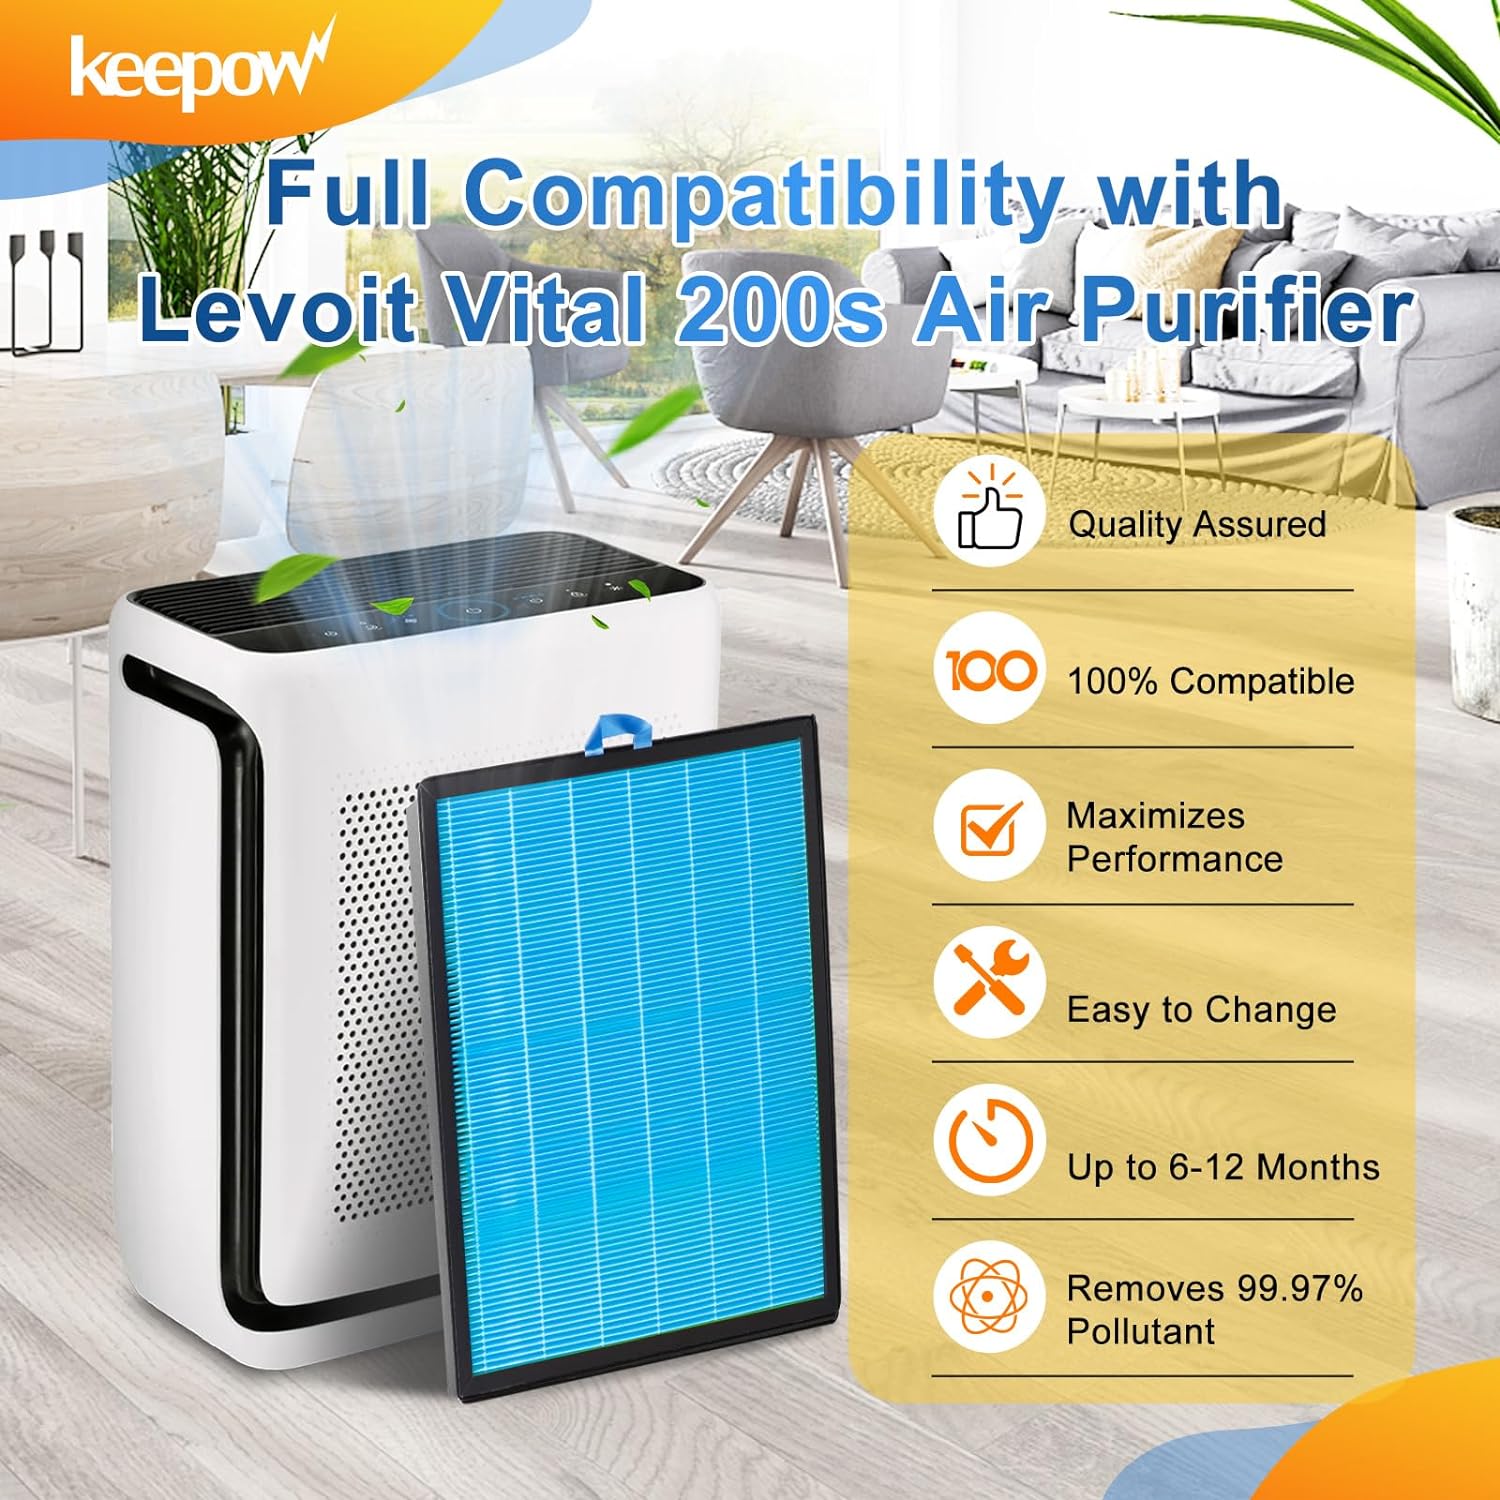 Keepow 3408F Air Filter for Vital 200S rf Smoke Remover Air Purifier Replacement Filters 3-in-1 H13 Ture HEPA and High-Efficiency Activated Carbon Filter Replace Part